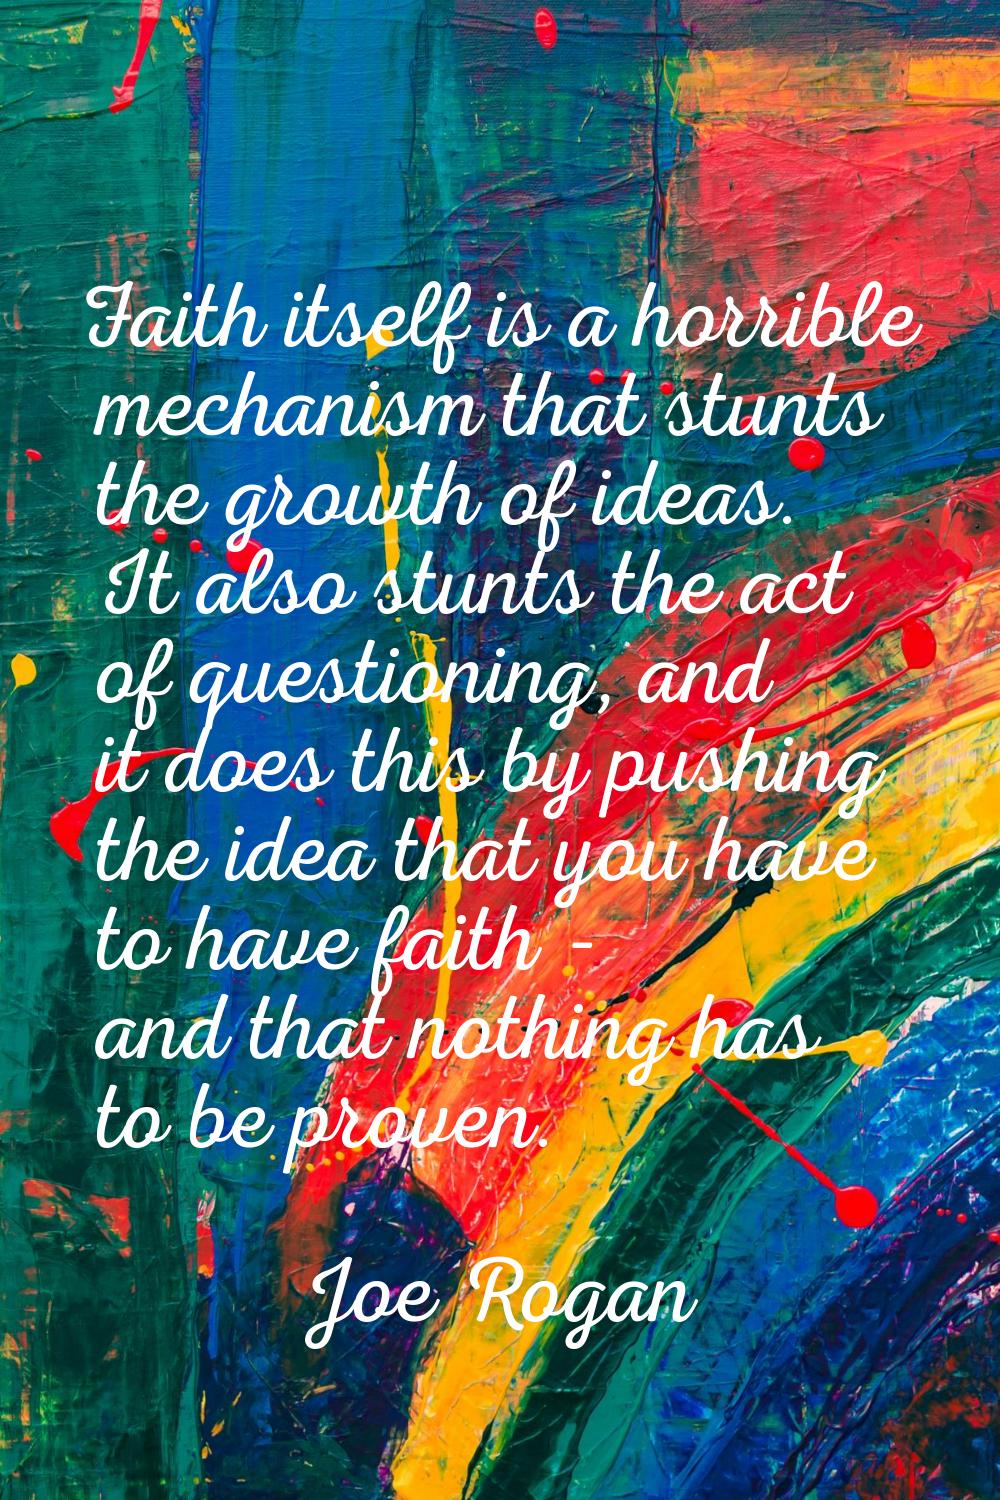 Faith itself is a horrible mechanism that stunts the growth of ideas. It also stunts the act of que